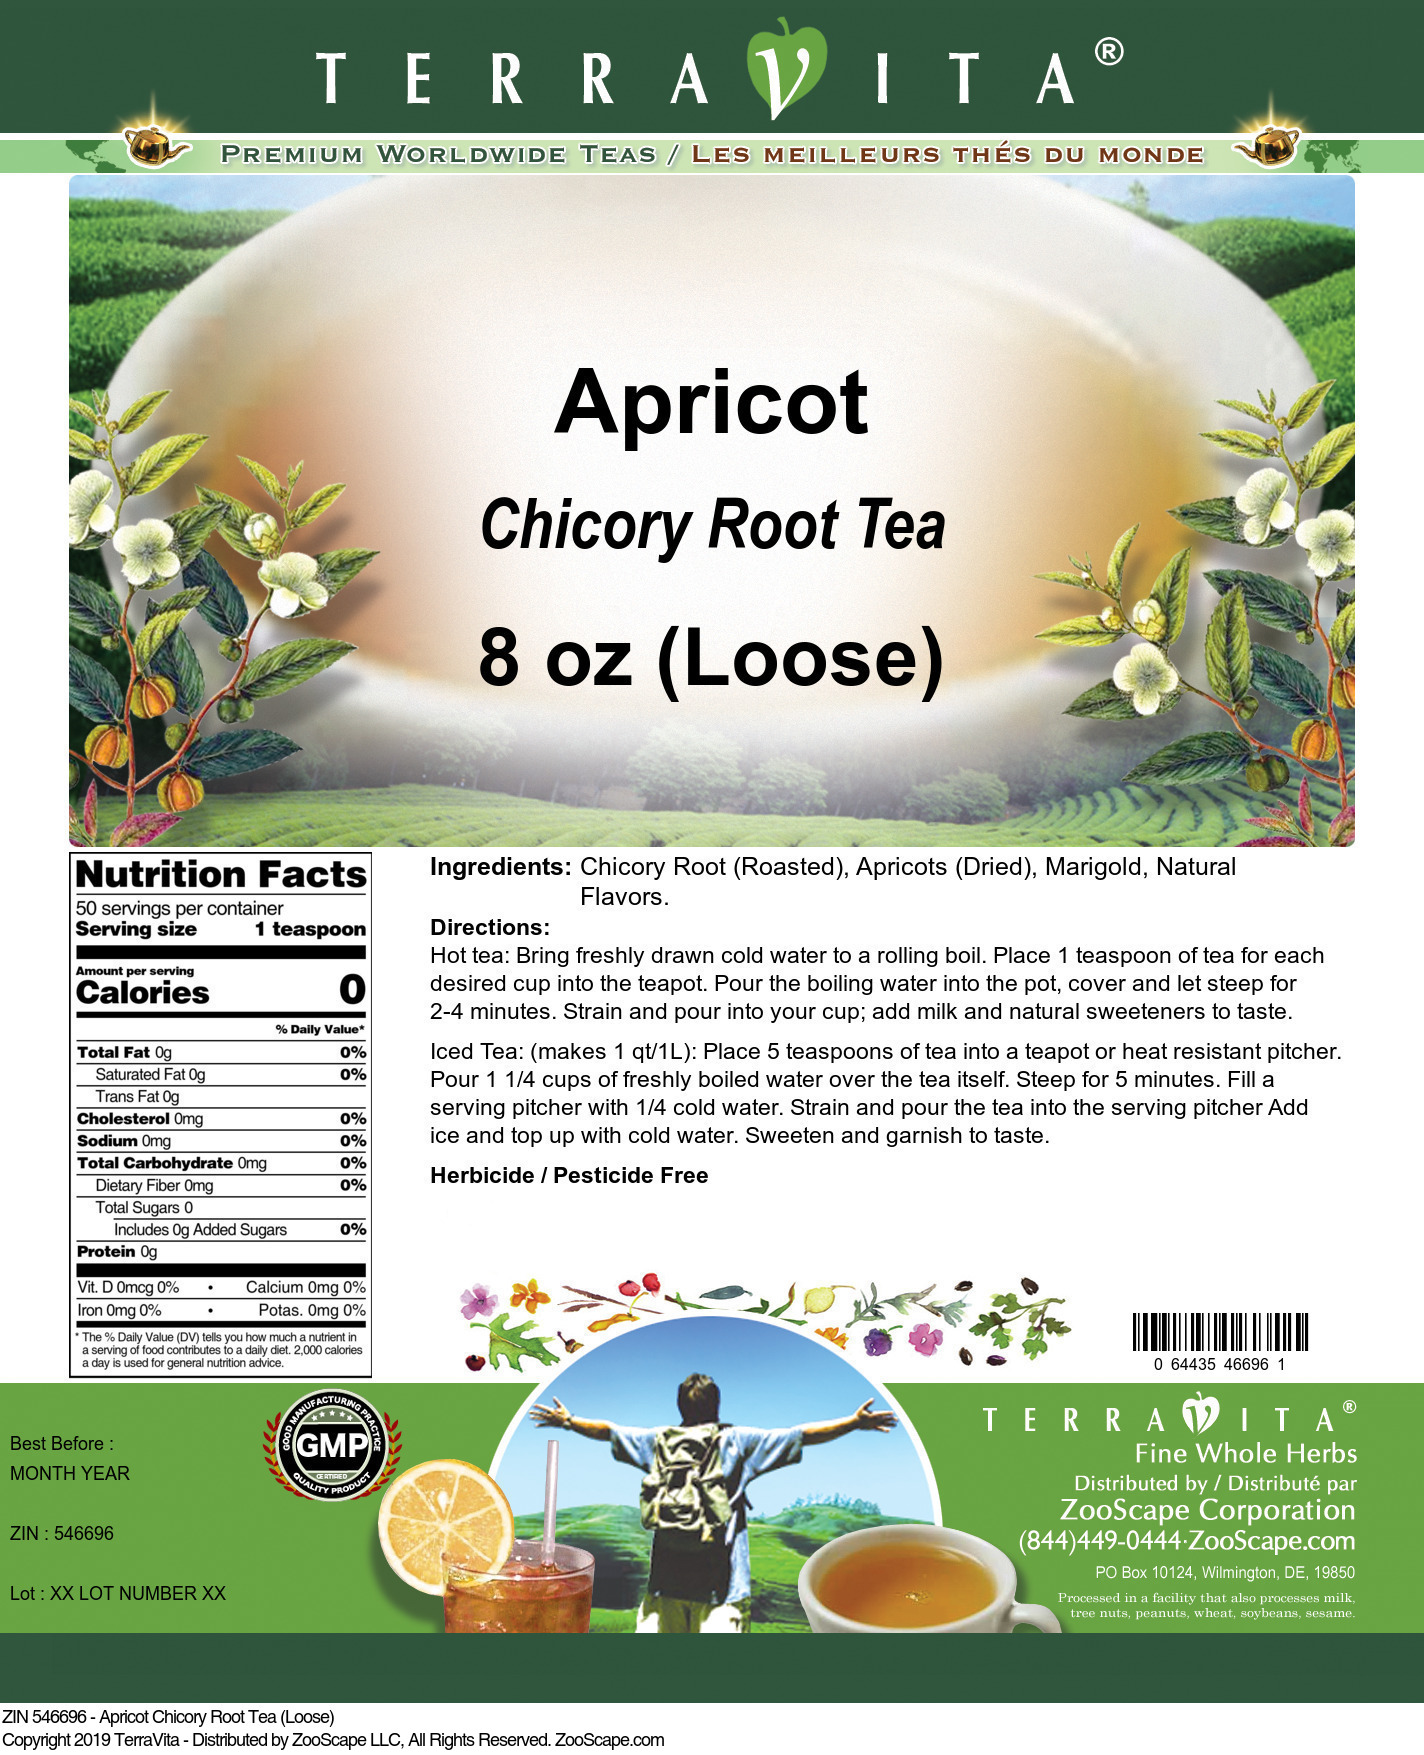 Apricot Chicory Root Tea (Loose) - Label